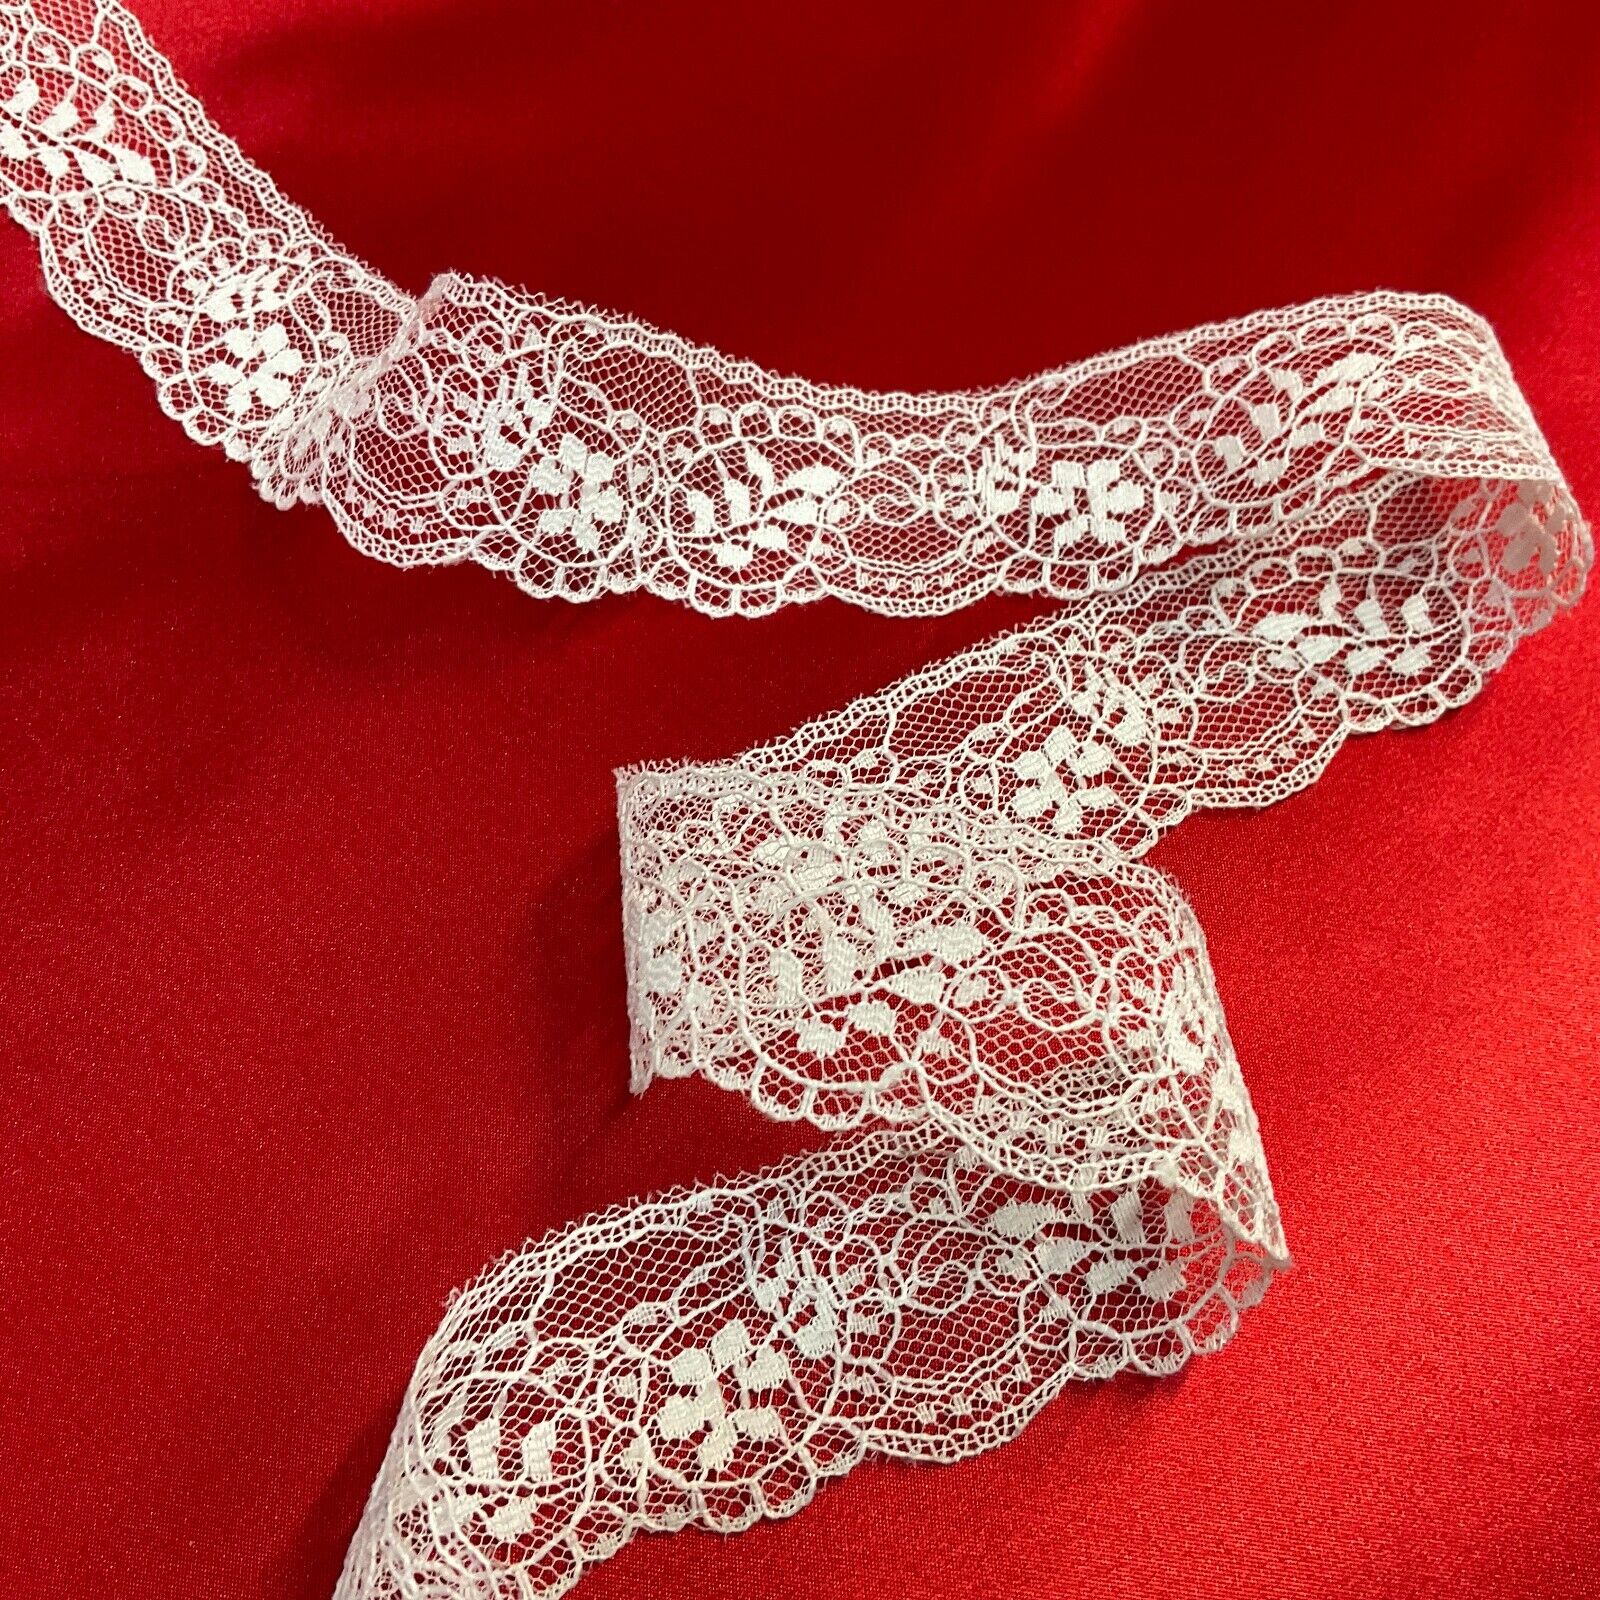 30mm wide White scalloped edge Flat Lace trimming edging border M1719